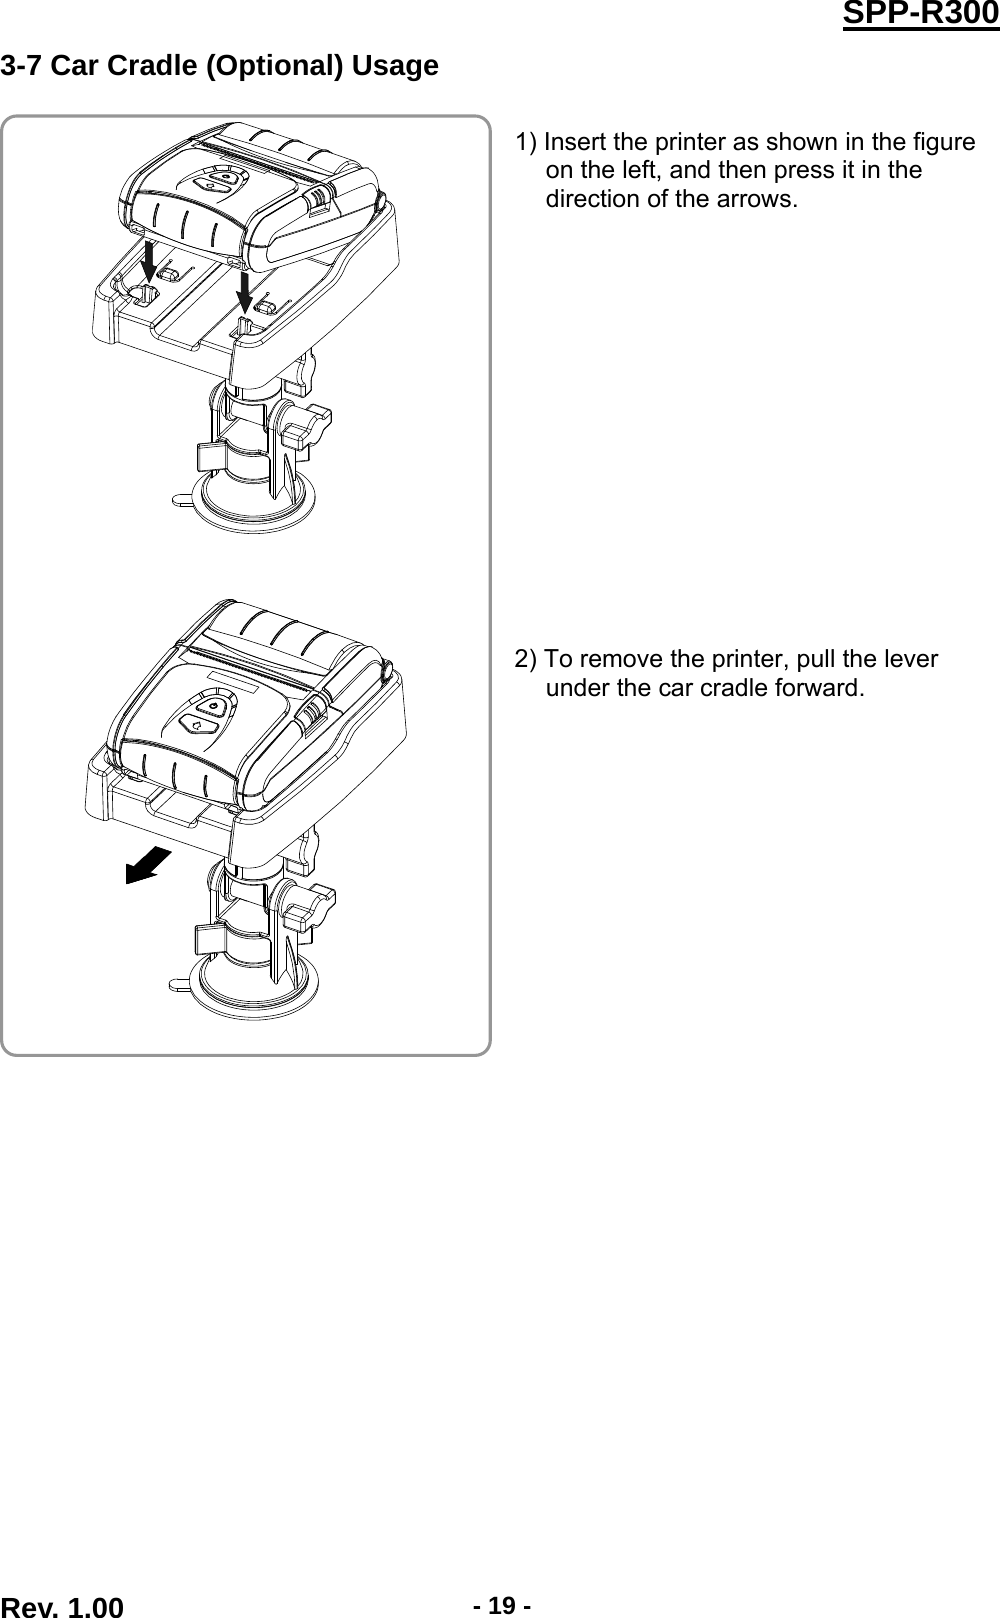  Rev. 1.00  - 19 -SPP-R3003-7 Car Cradle (Optional) Usage  1) Insert the printer as shown in the figure on the left, and then press it in the direction of the arrows.                2) To remove the printer, pull the lever under the car cradle forward.         